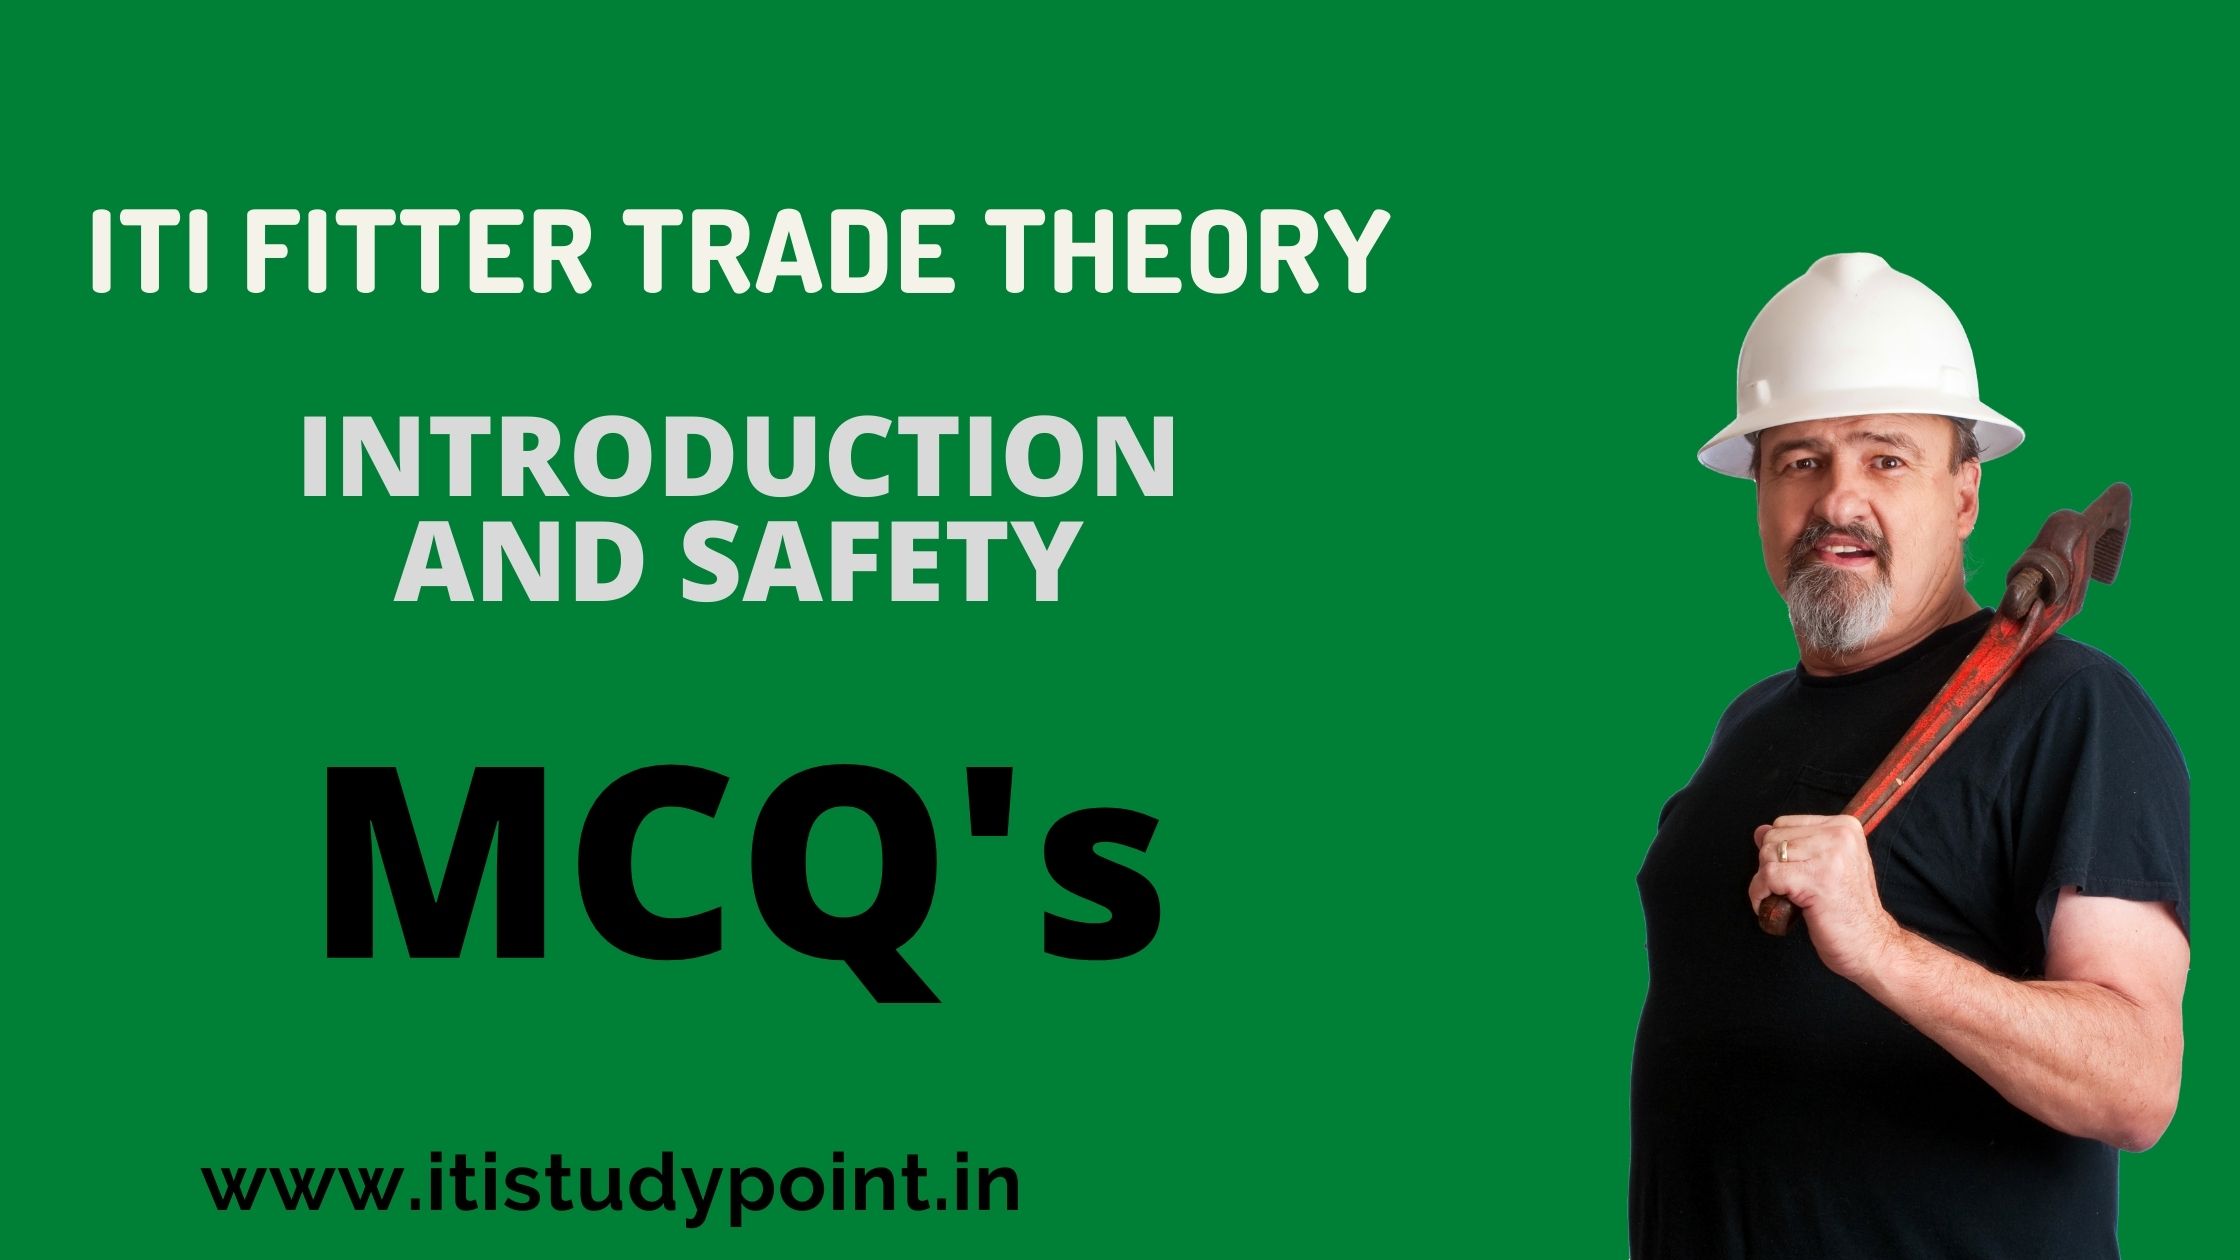 INTRODUCTION AND SAFETY MCQ Part 1- ITI Fitter Trade Theory